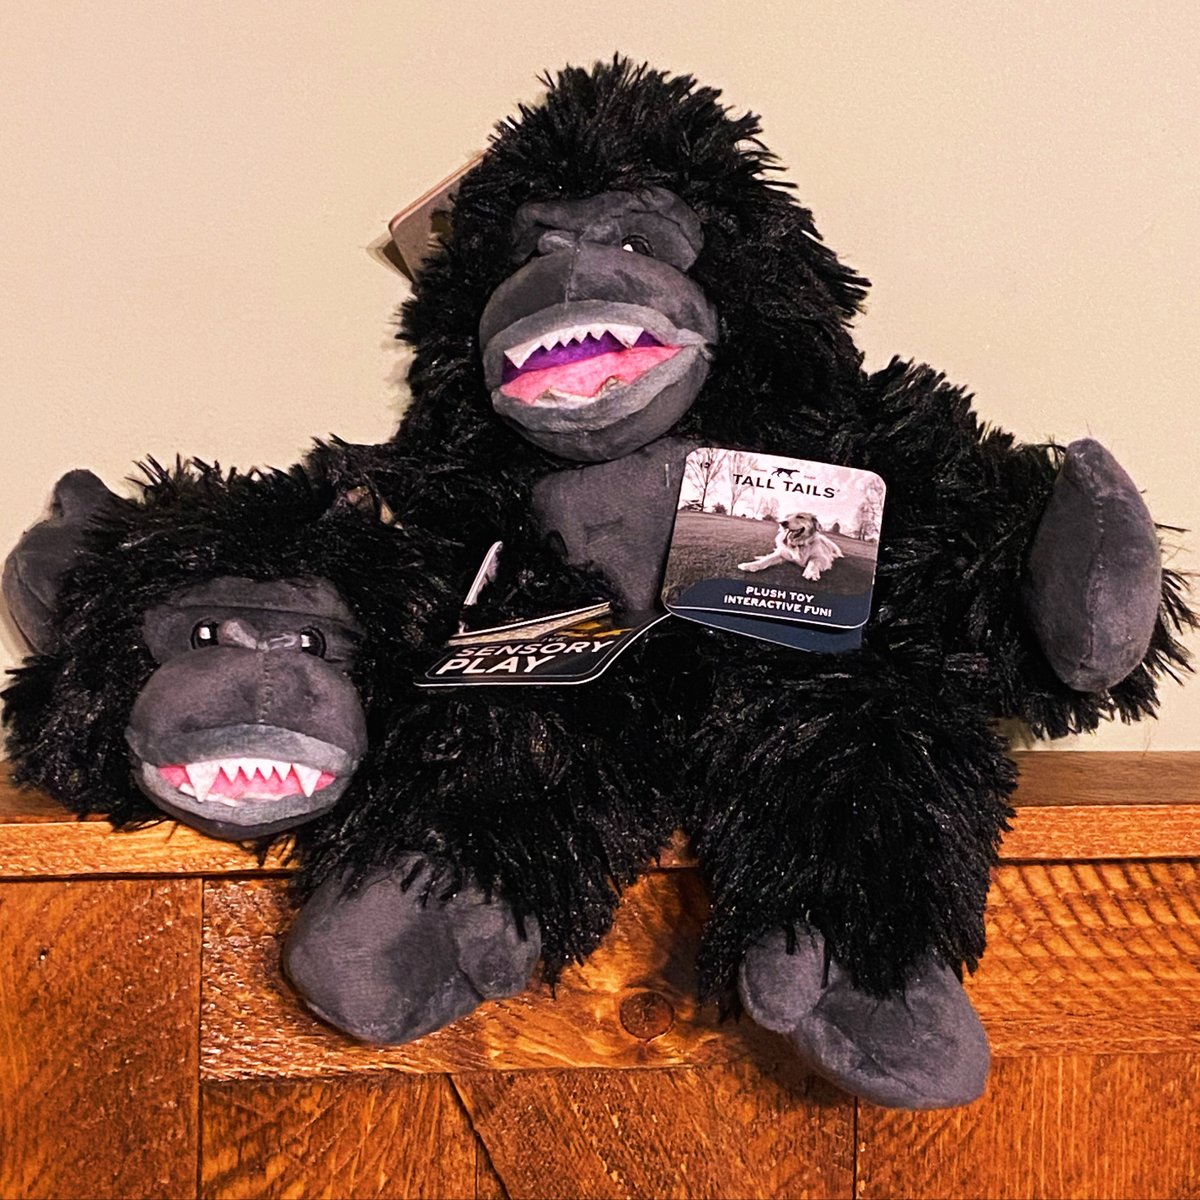 YES! #Godzilla x #Kong: The New Empire will once again be the #1 movie at the US box office! Today's #FreebieFriday giveaway prize pack is this @talltailstrail Gorilla Rope Body Dog Toy & 2-in-1 Fetch Ball Dog Toy. Visit Pet Age on IG for giveaway details! #TGIF #MonsterVerse